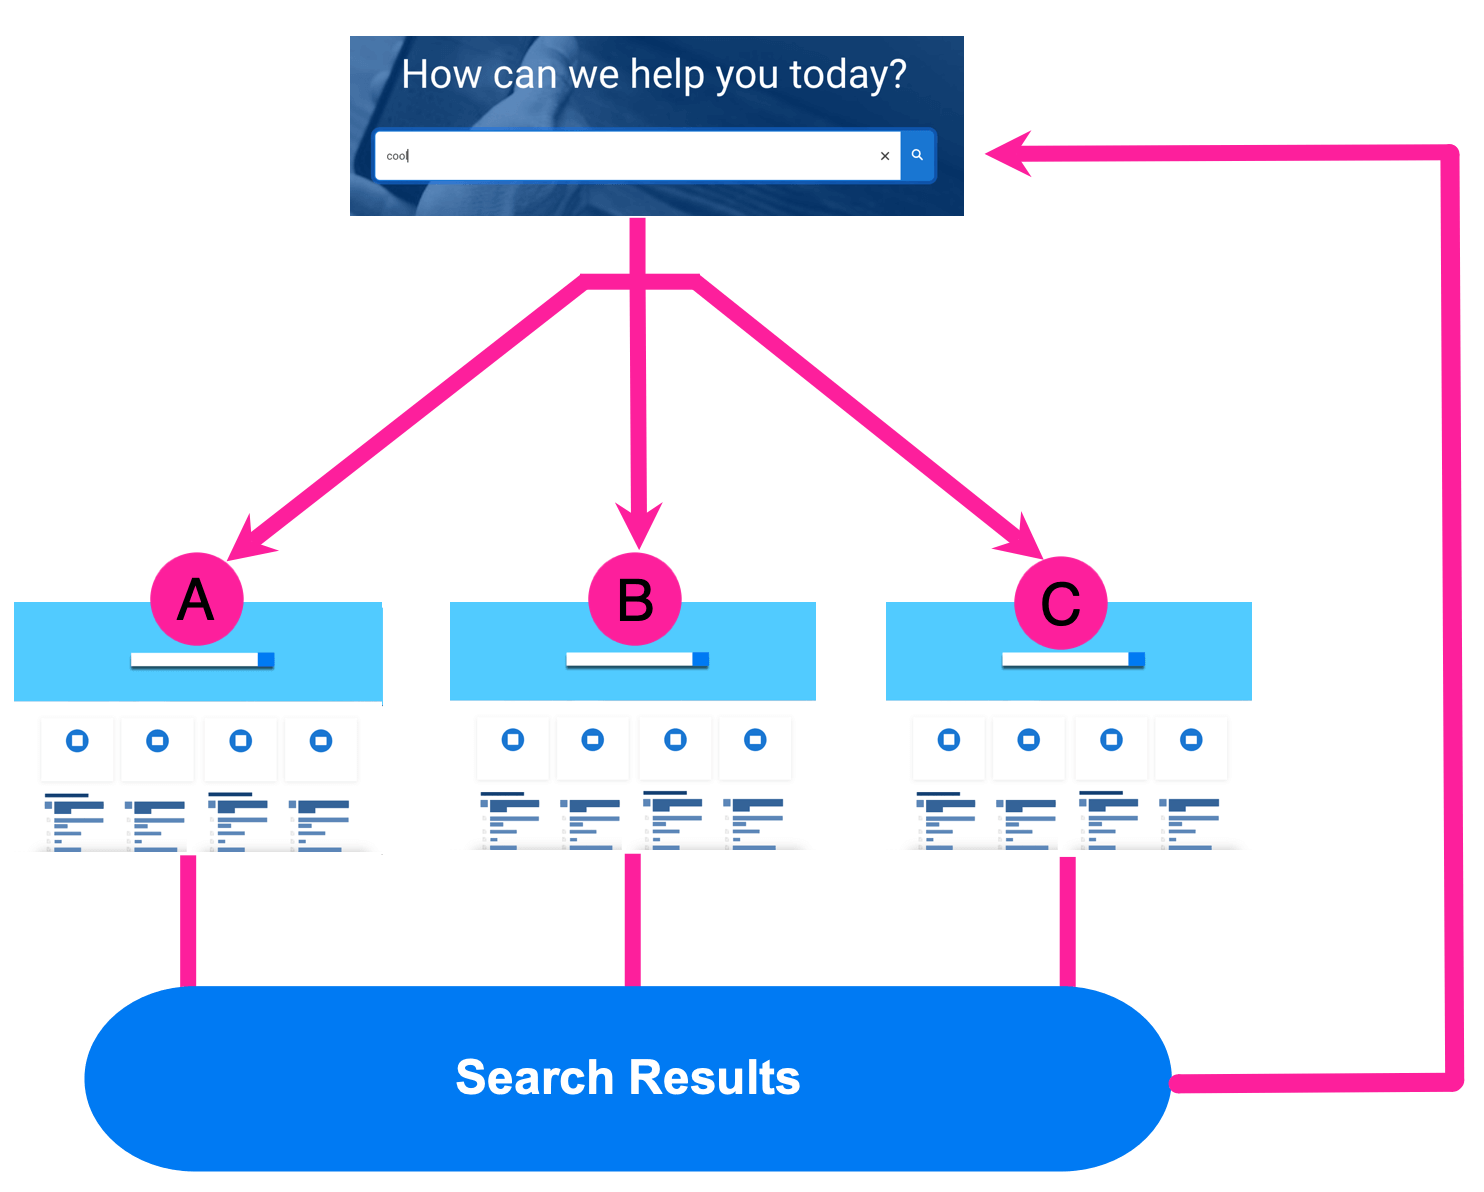 Federated search diagram. A search field has arrows pointing towards 3 different help centers. They lead from the help centers to a panel labelled search results. An arrow points from search results back to the search field.